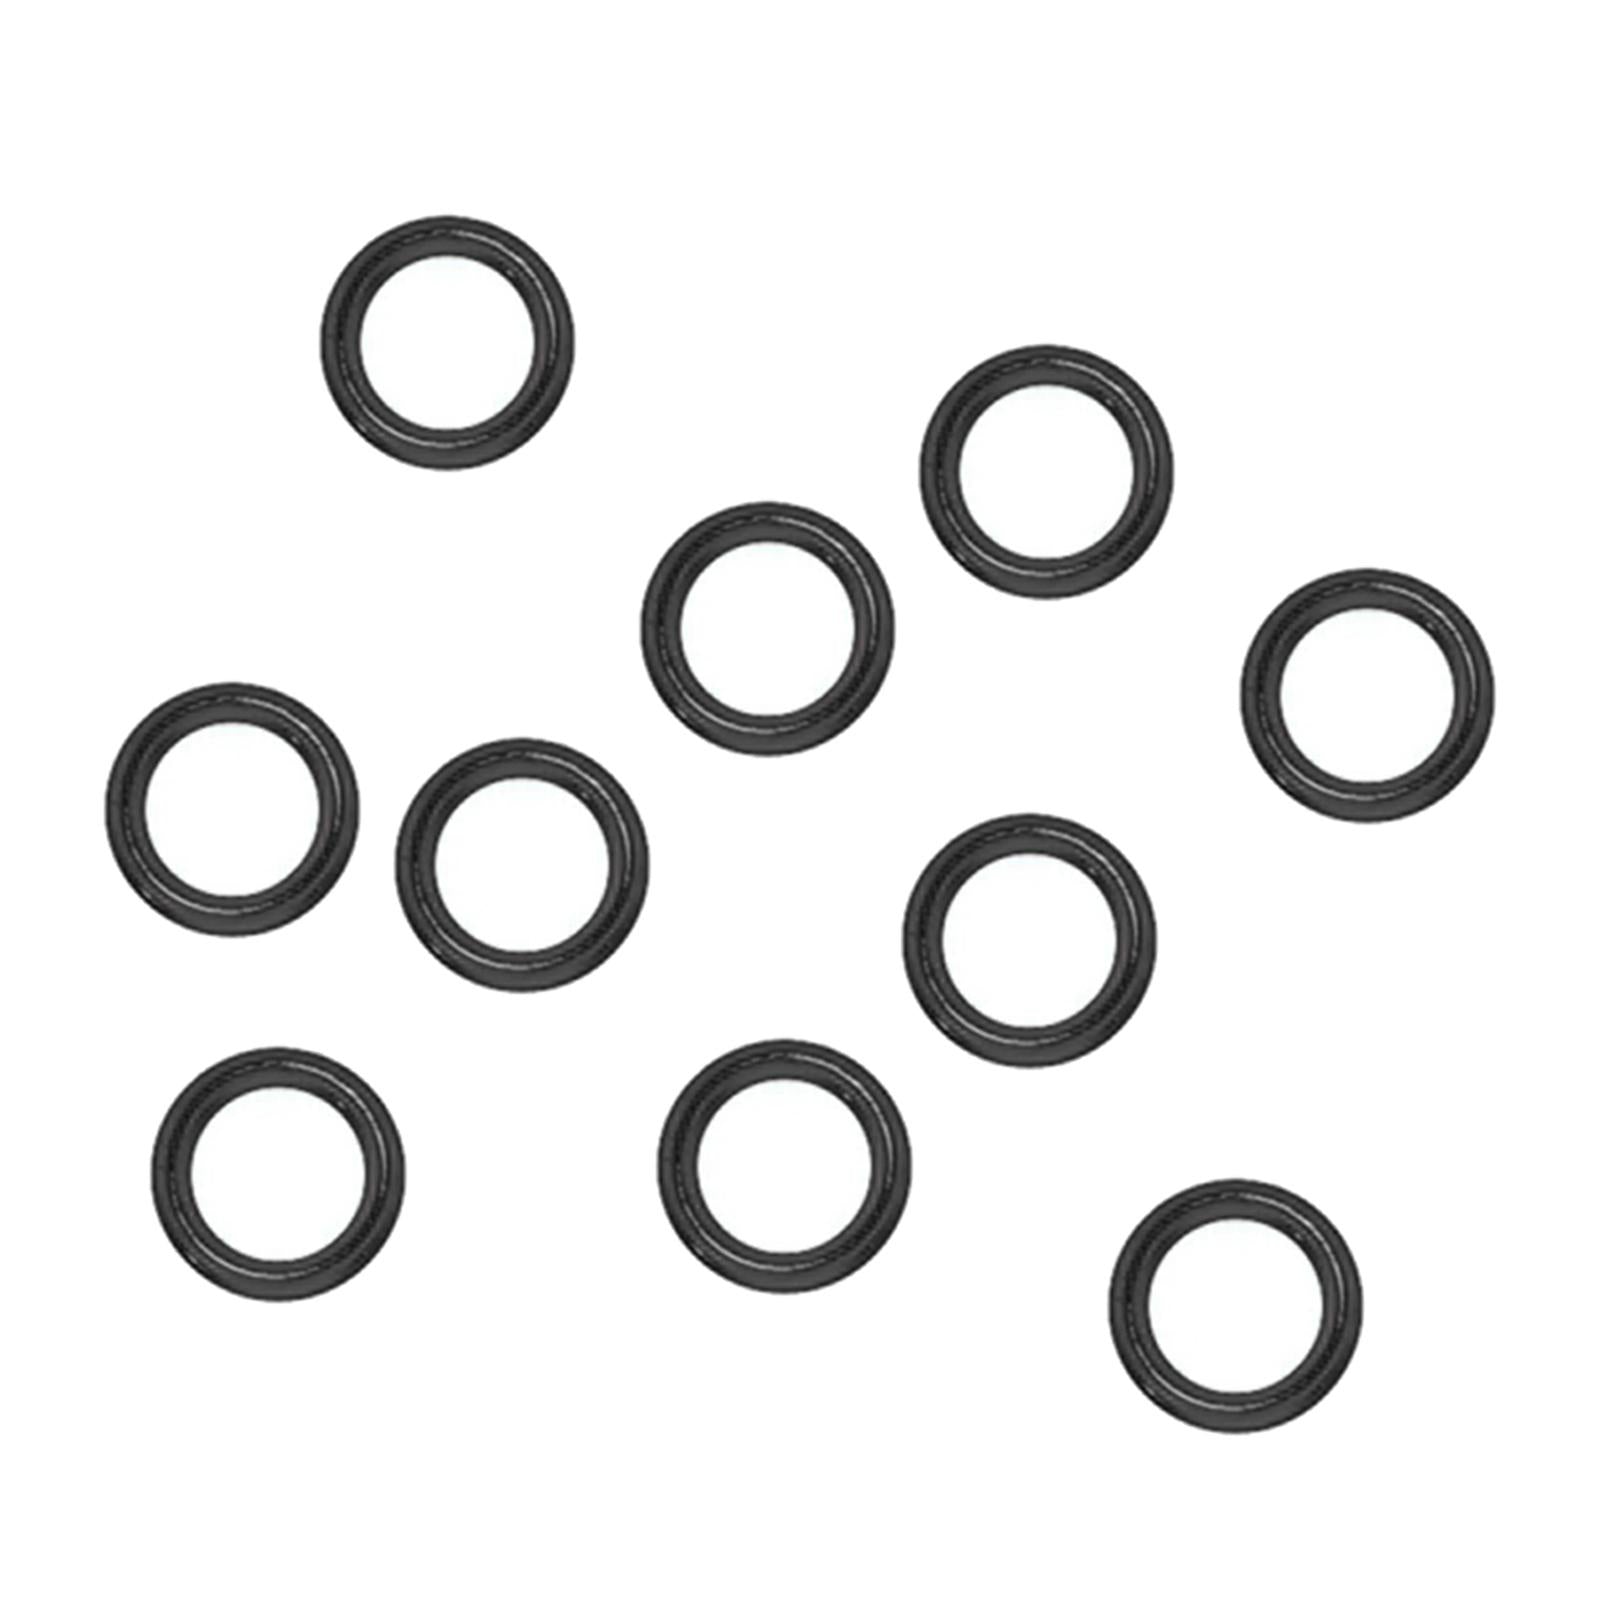 10 Pieces O-Rings Spare Parts Pressure Washer Set Rubber Rings for Karcher Black